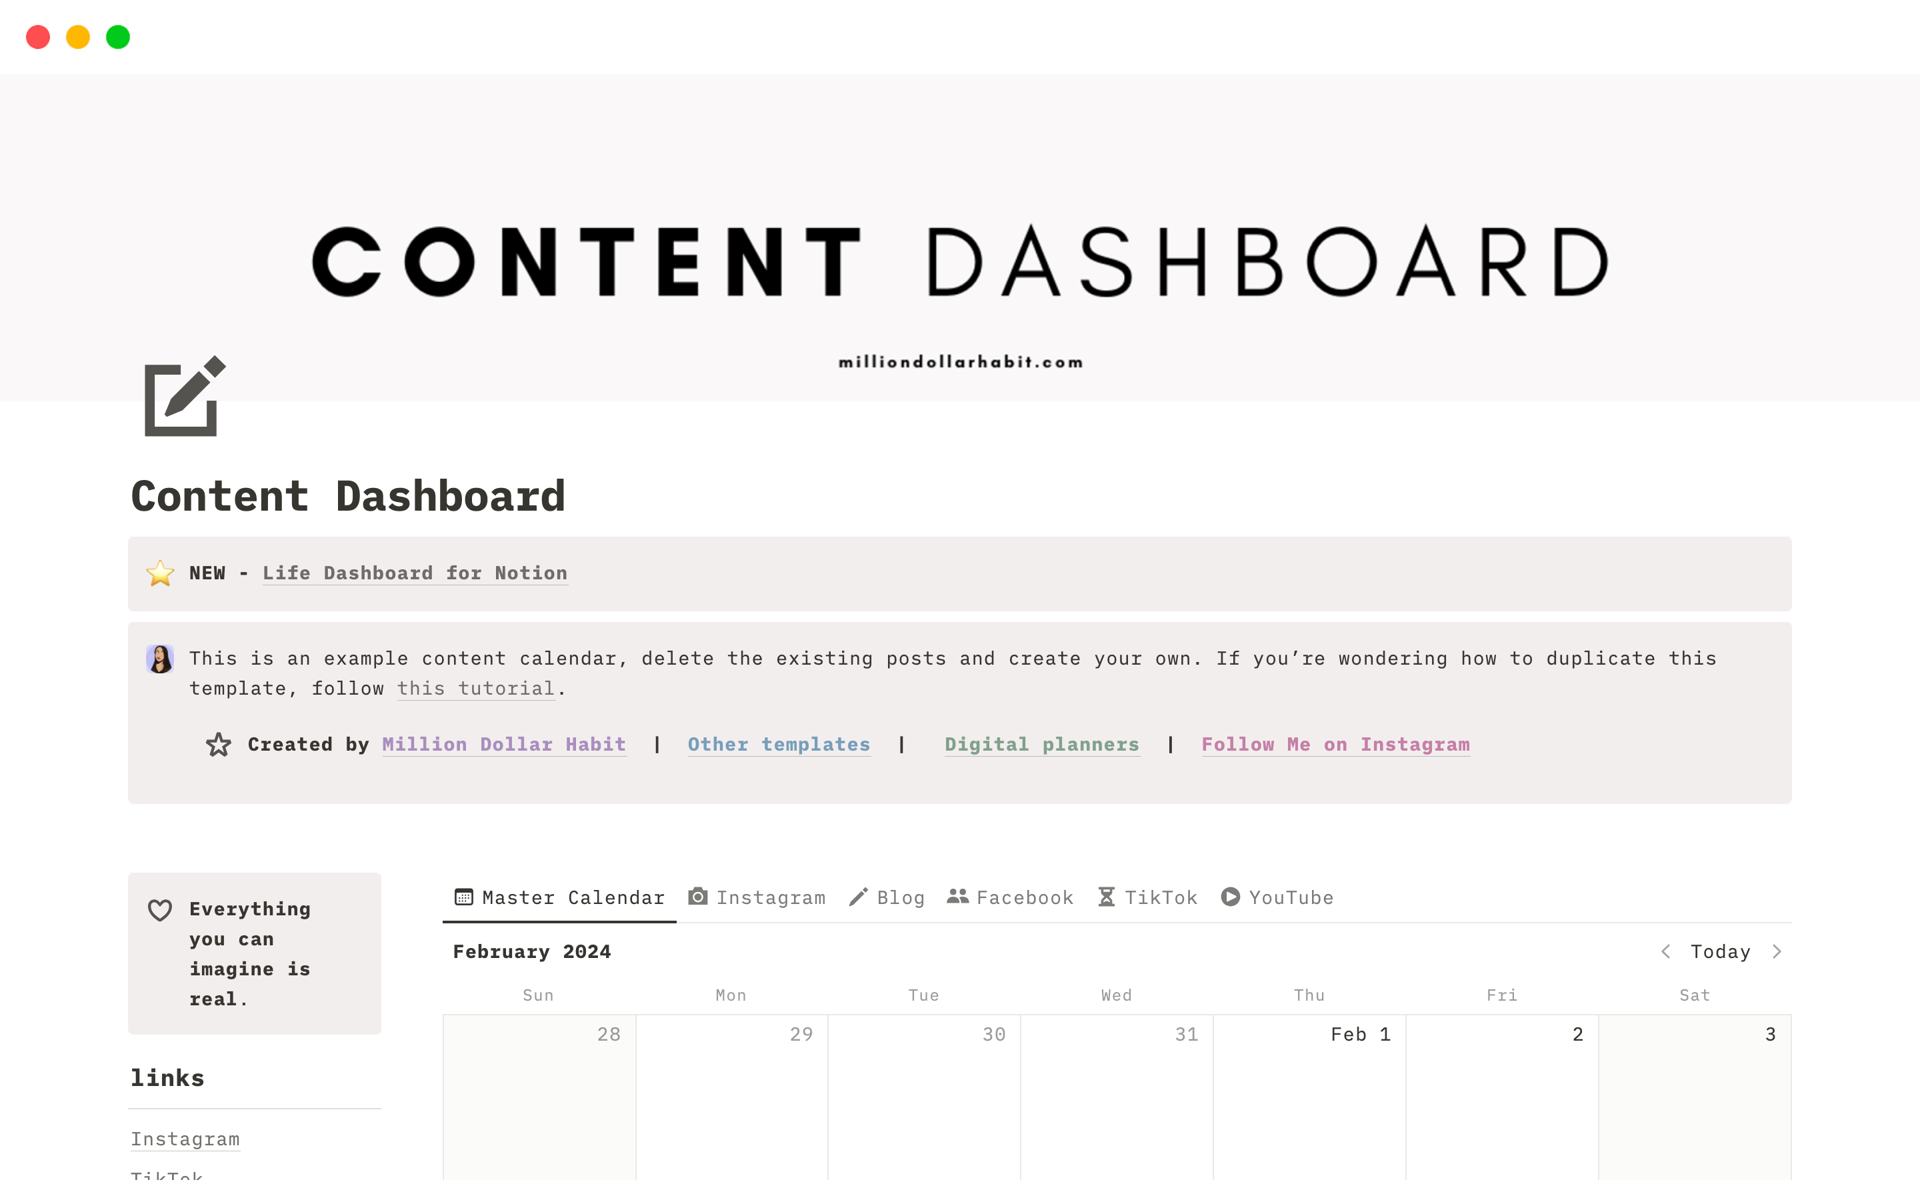 A template preview for Creator Content Planner